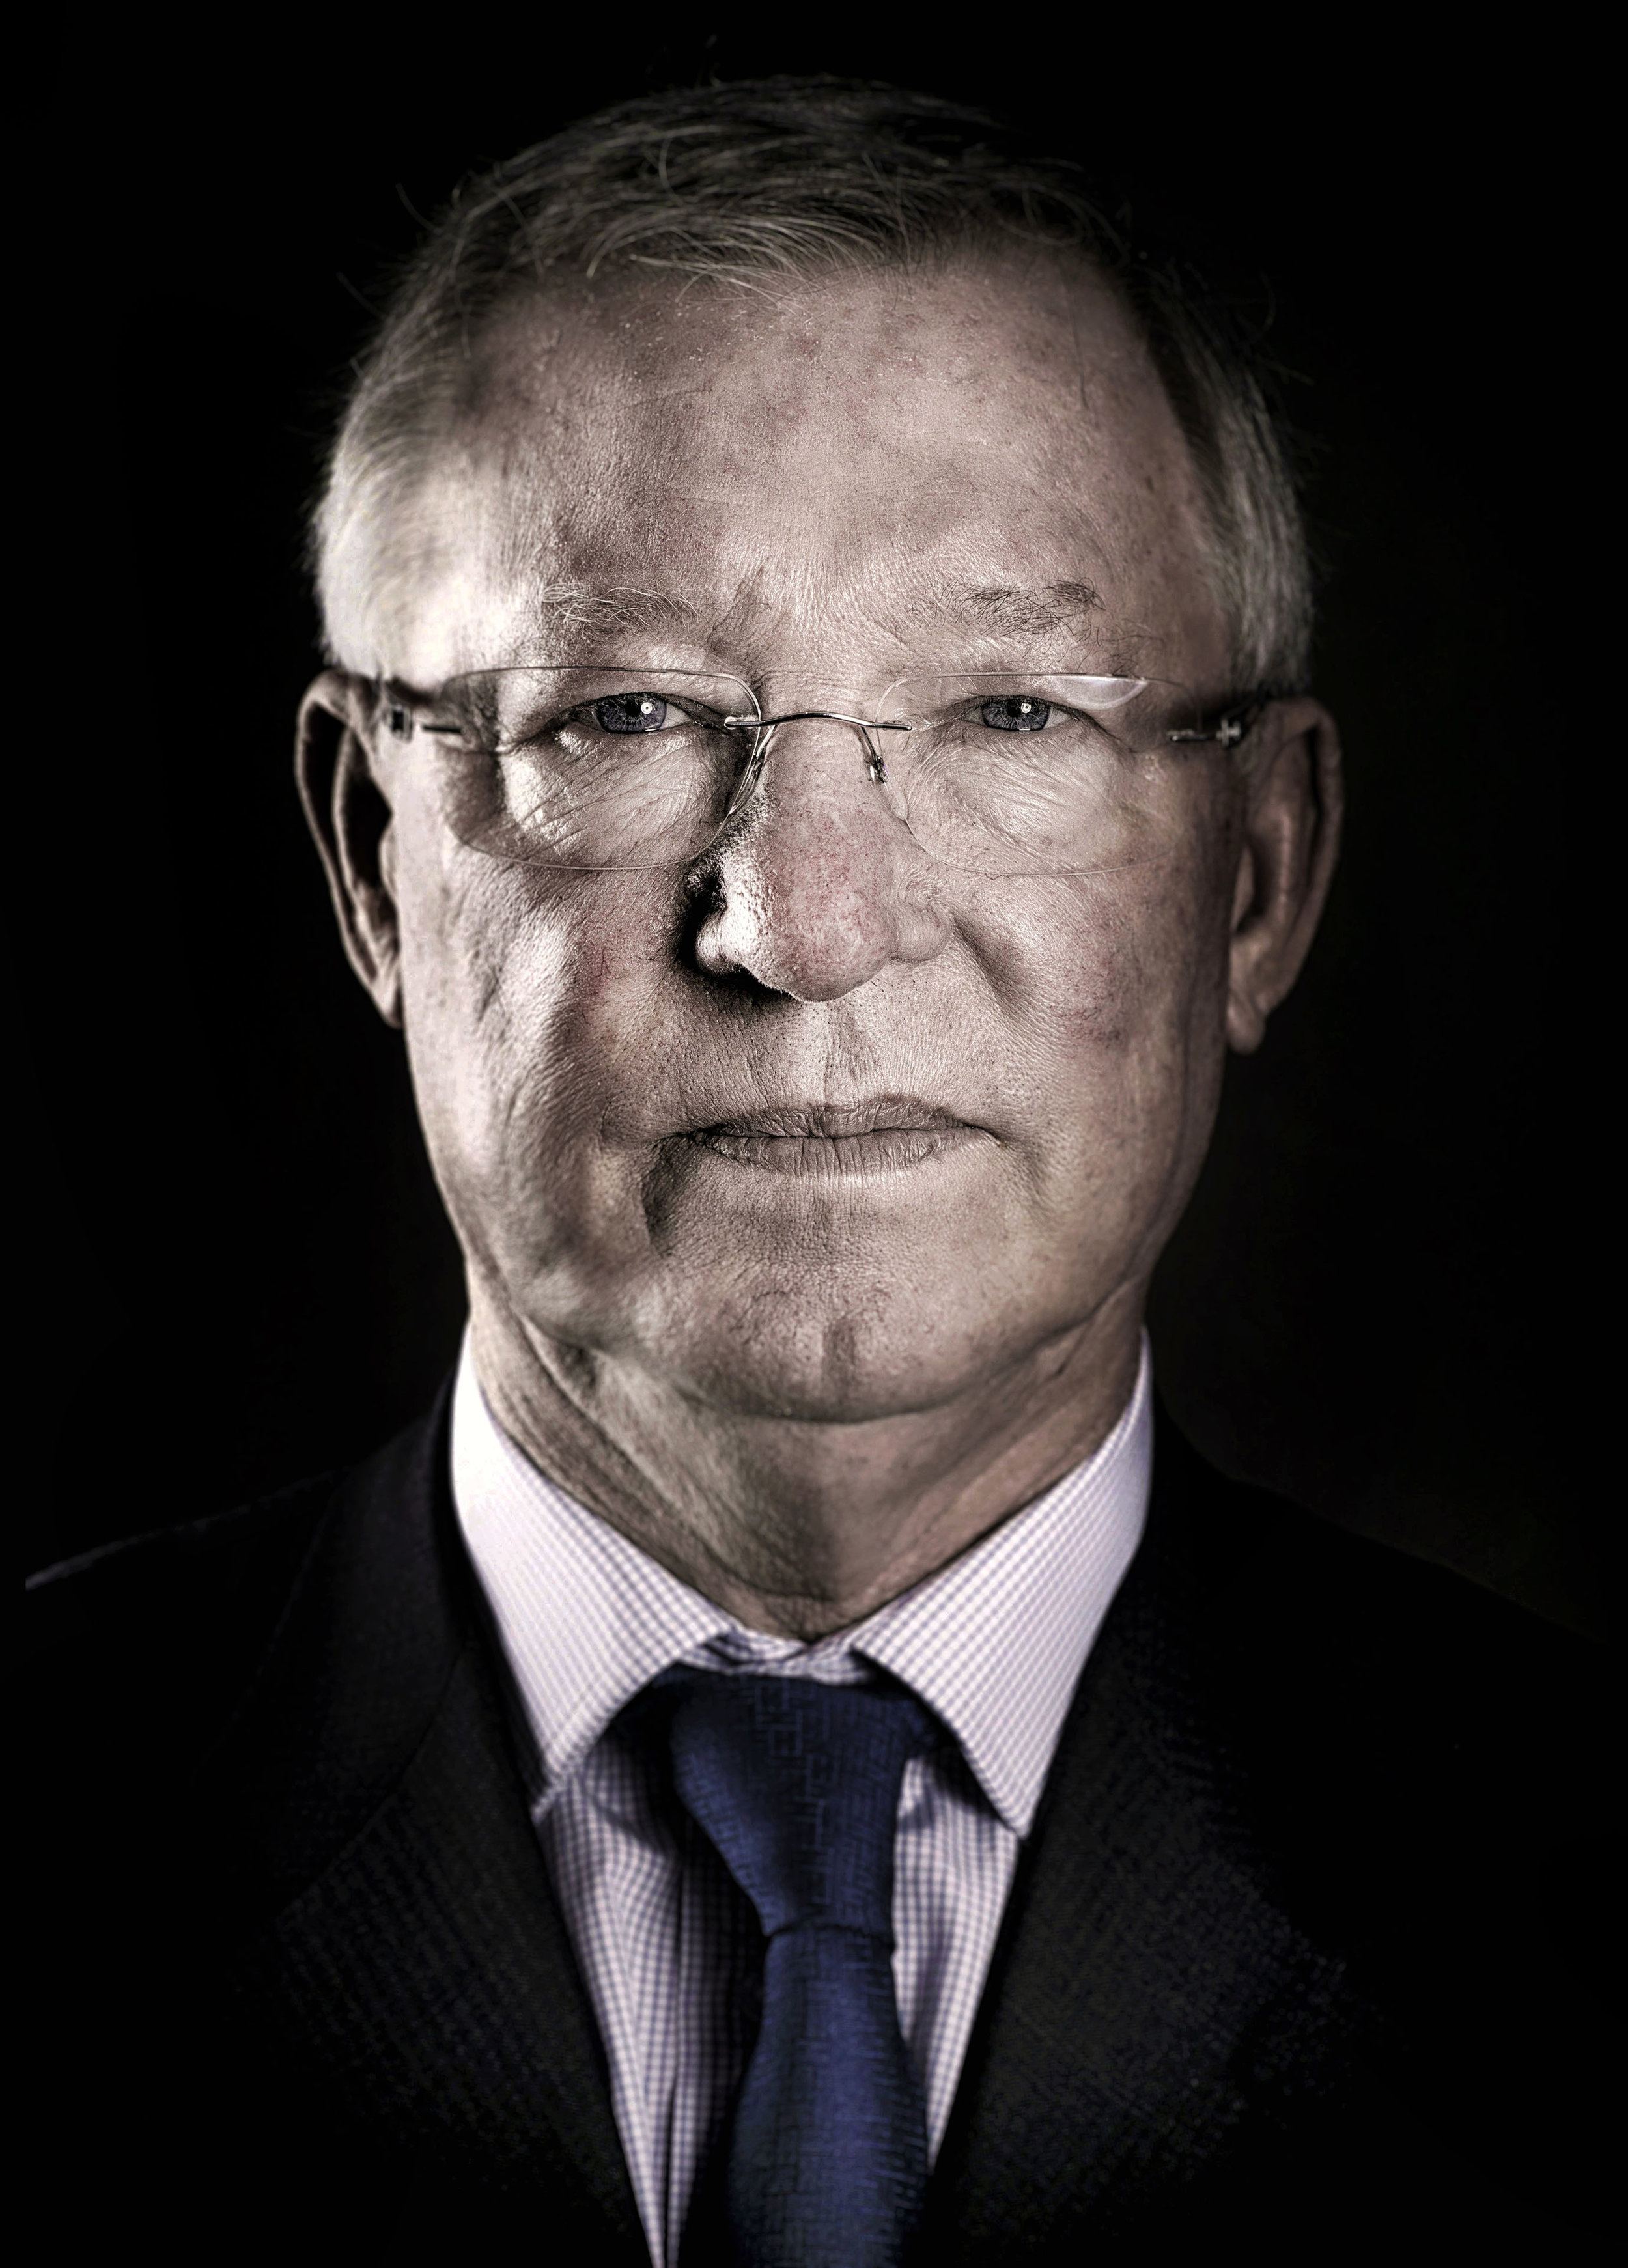  SIR ALEX FERGUSON PHOTOGRAPHED AT THE MOTTRAM HALL HOTEL FOR UEFA PHOTO CREDIT PUAL COOPER 